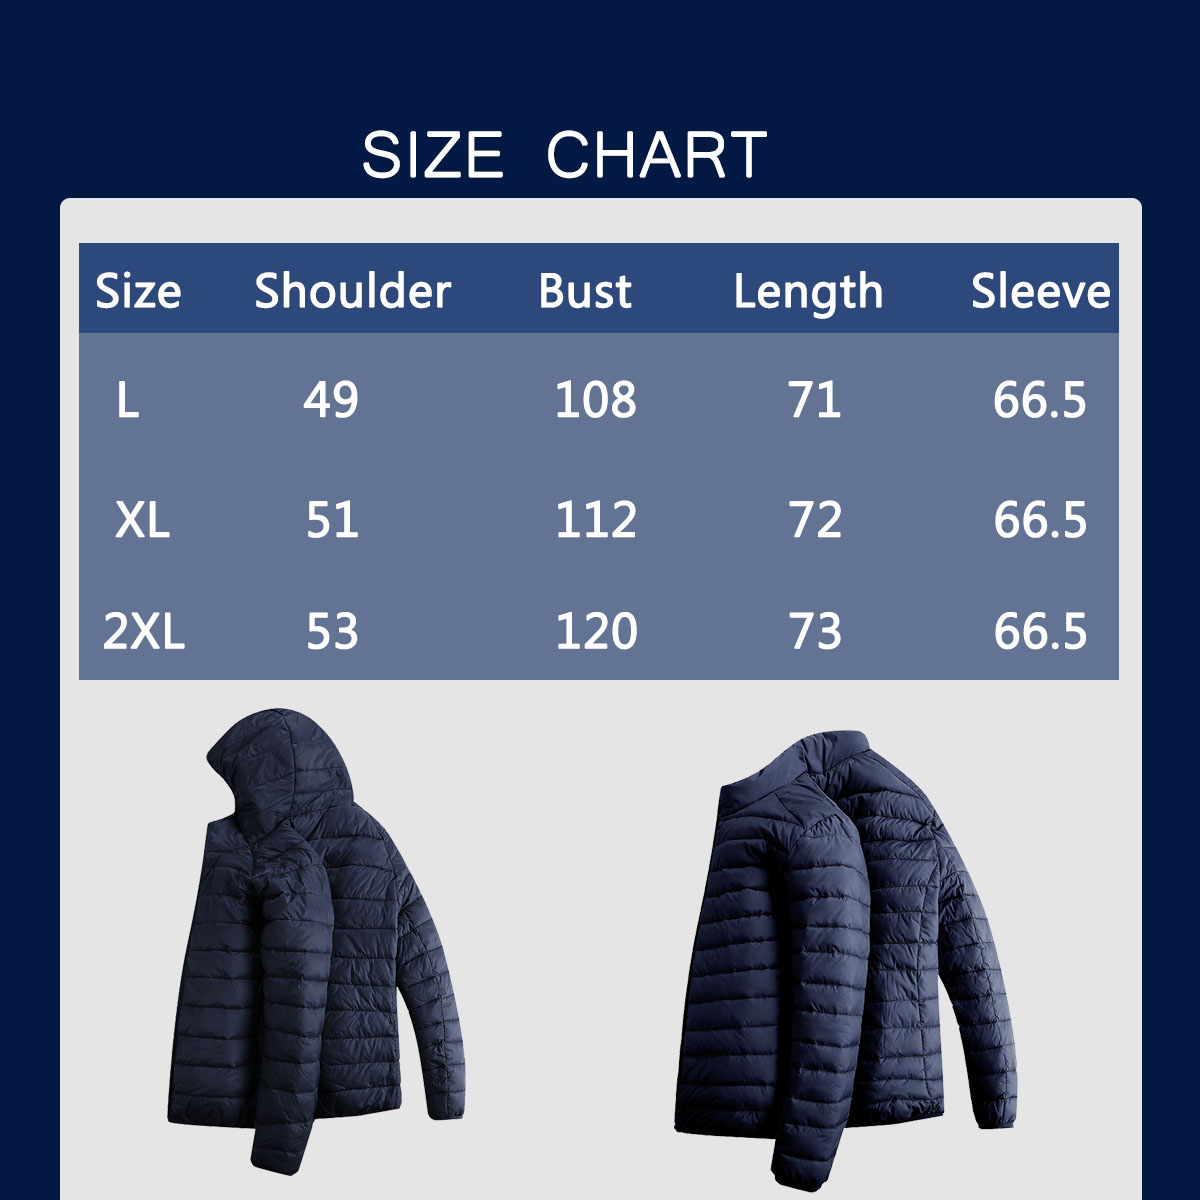 Packable Short Down Jacket Winter Puffer Coat Lightweight Quilted Down Parka Coat Hiking Outwear - image 2 of 4